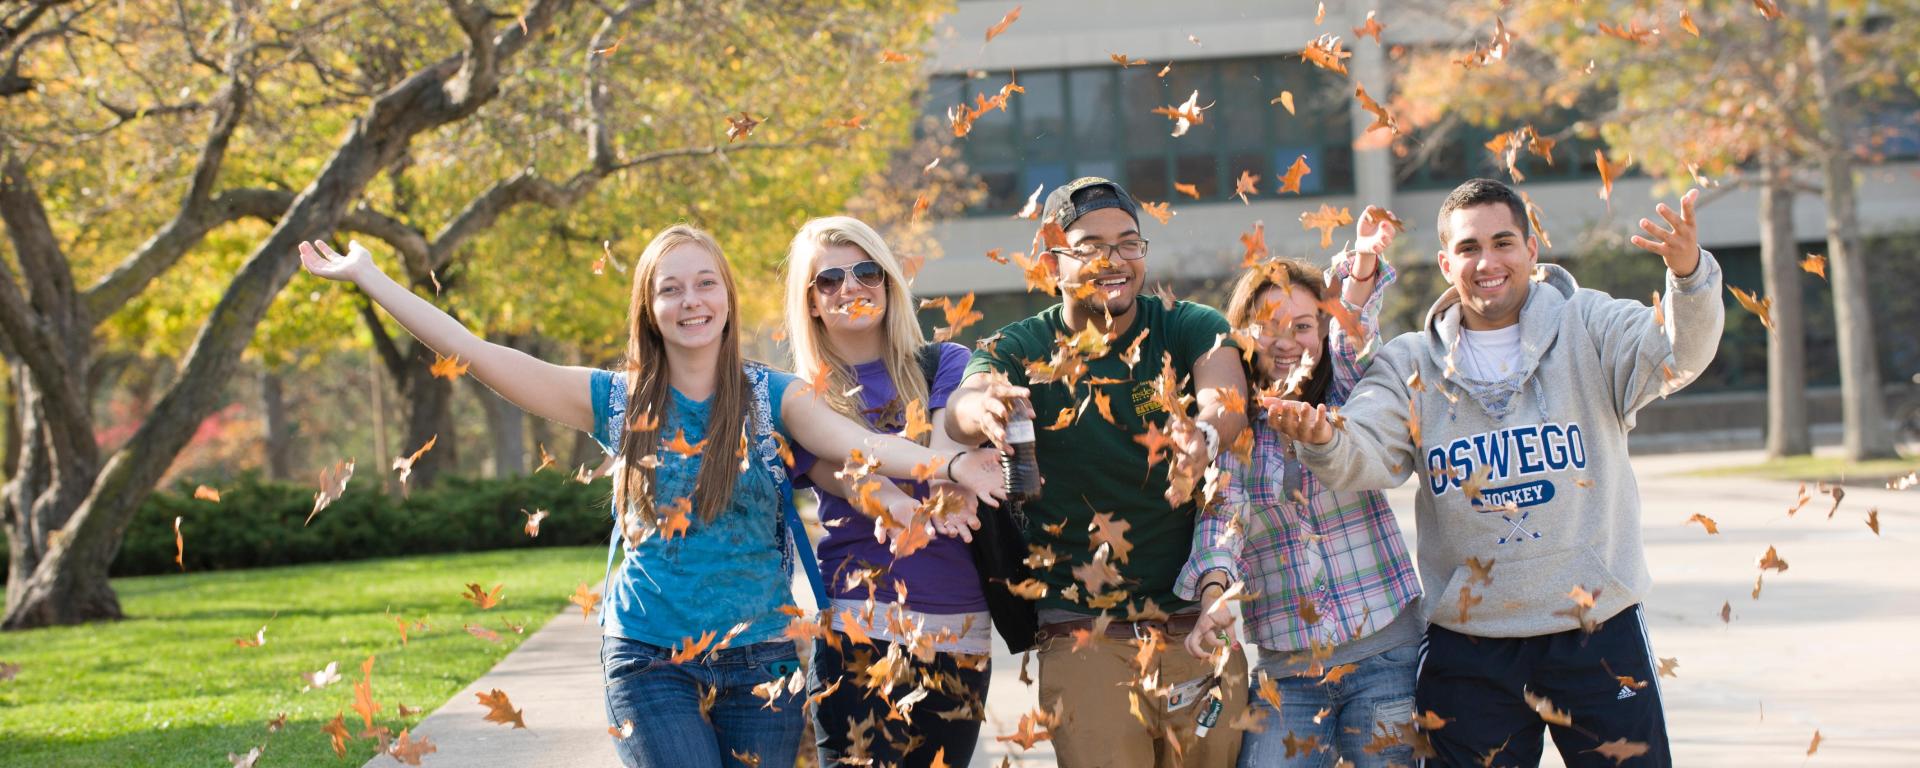 A group of students outside, smiling and throwing leaves in the air